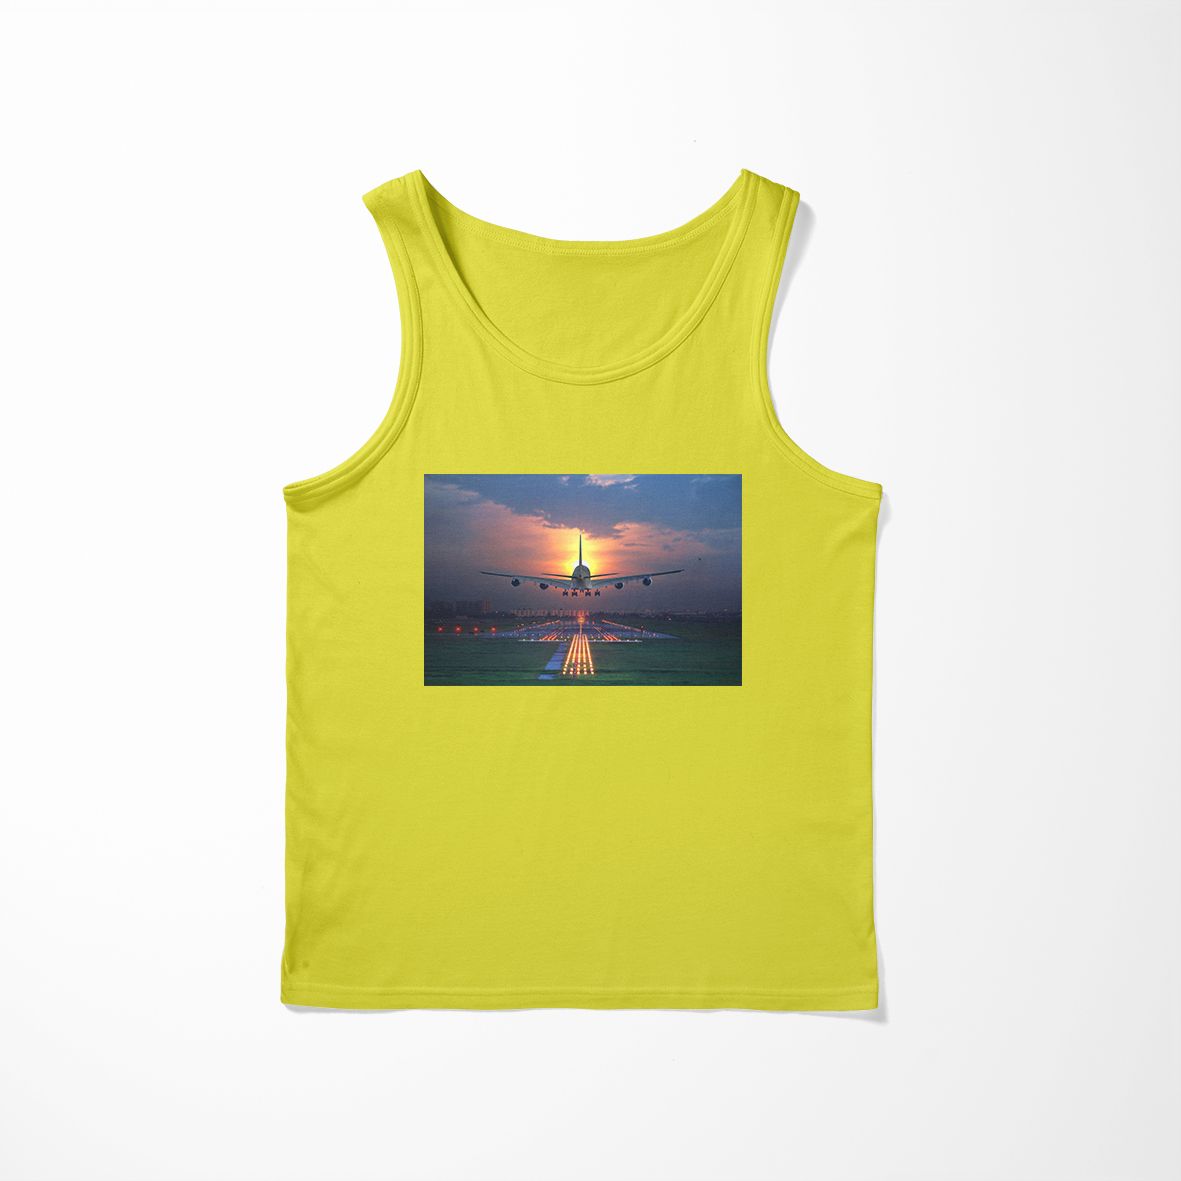 Super Airbus A380 Landing During Sunset Designed Tank Tops